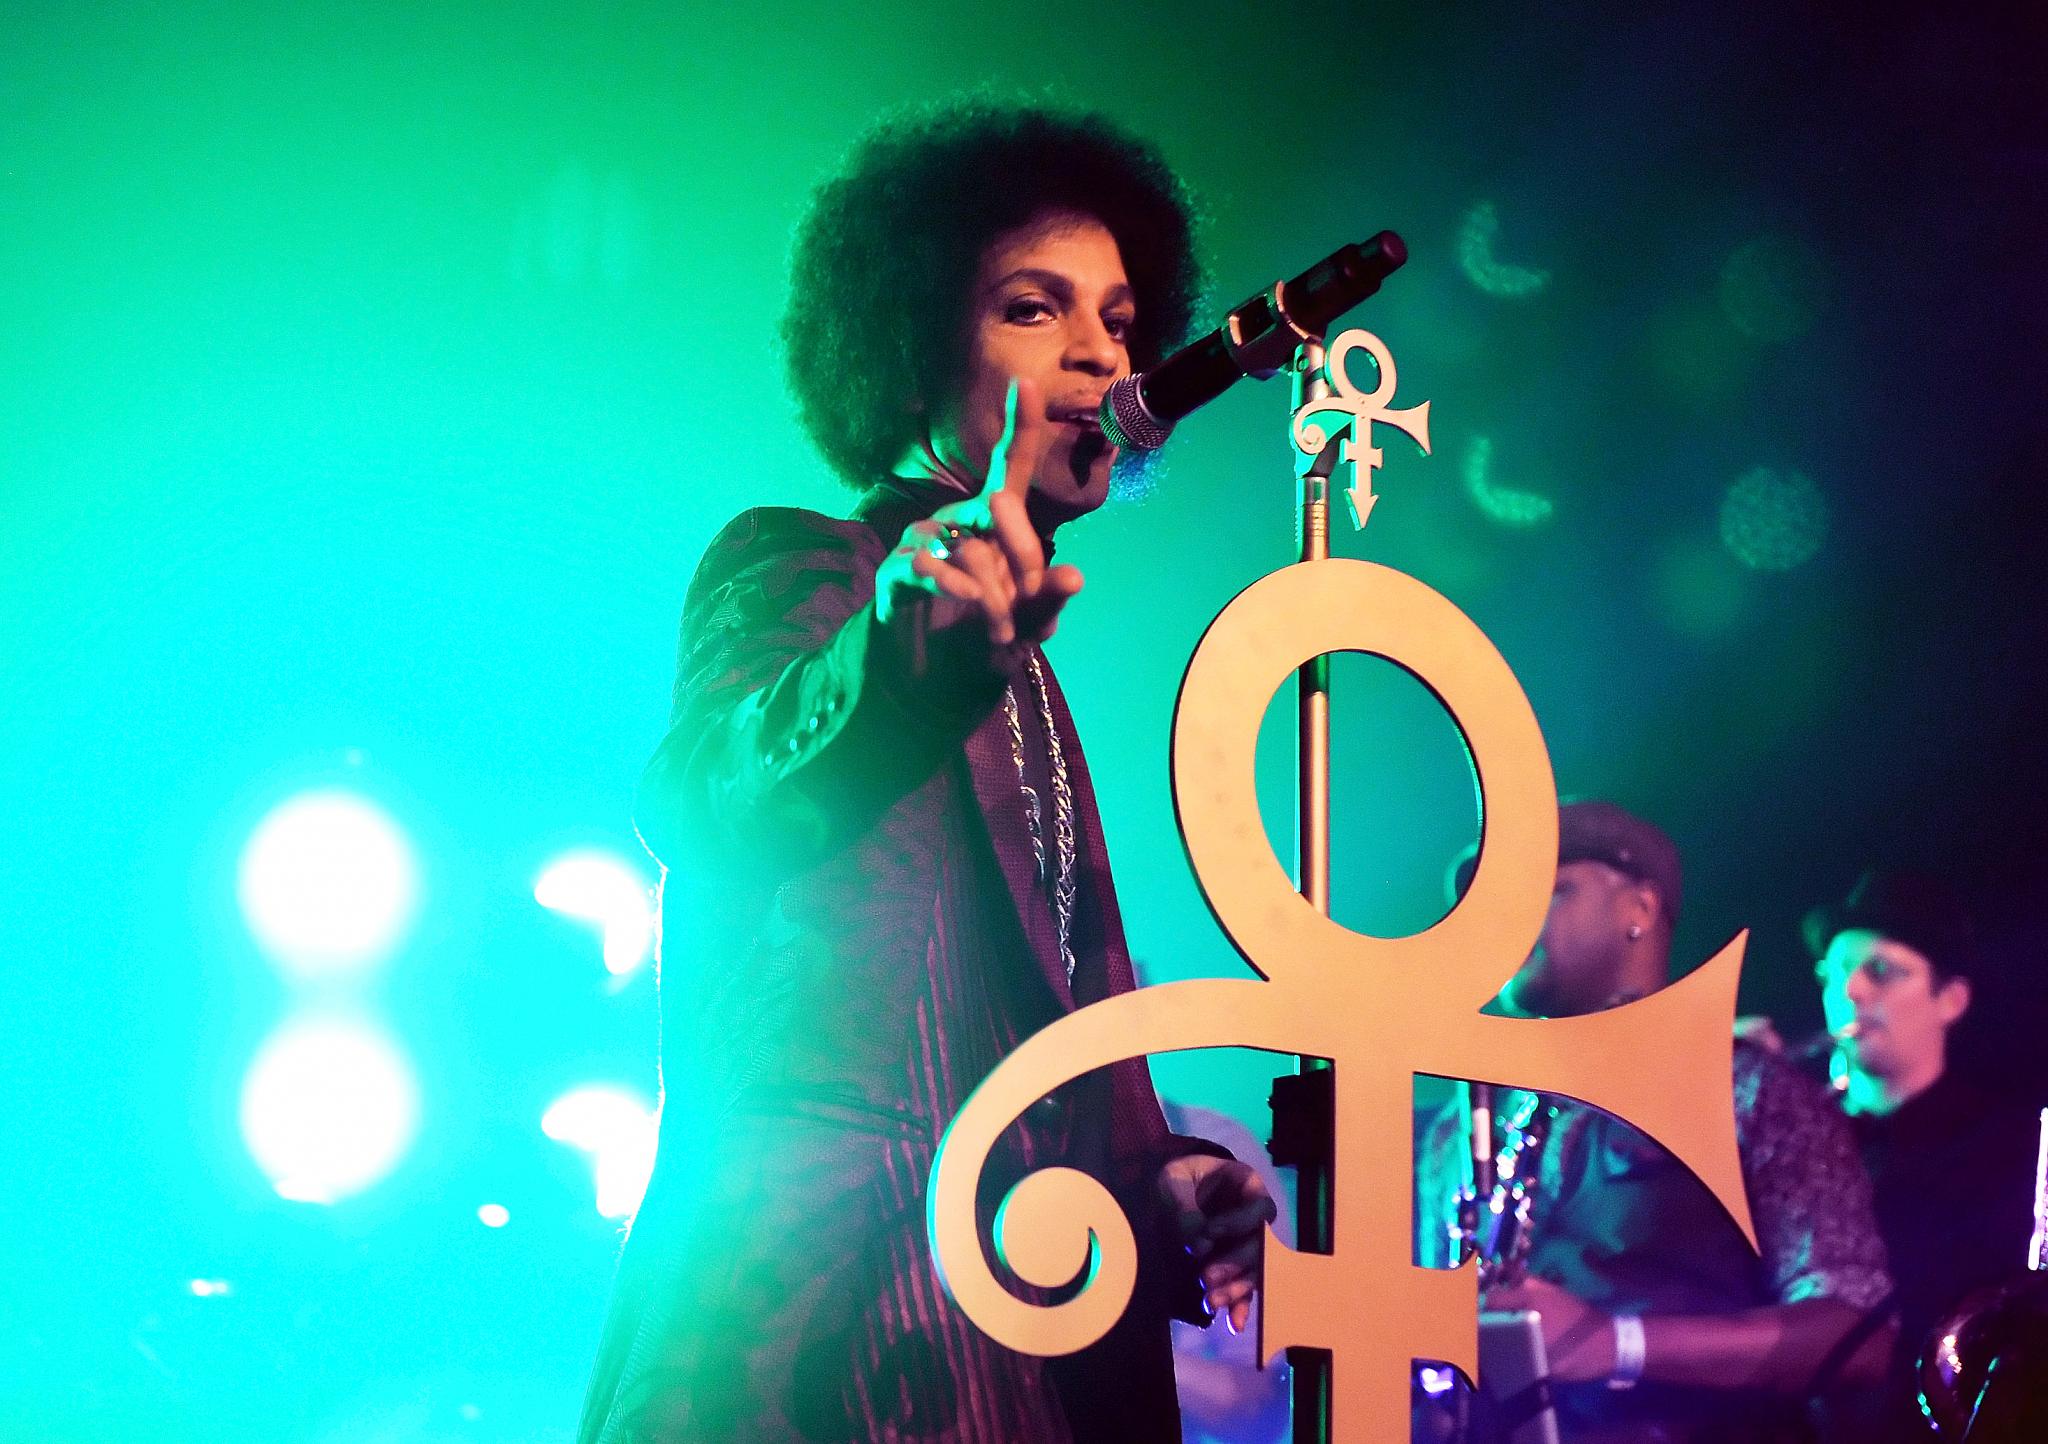 Fans Share Video Footage From Prince's Final Major Concert in Atlanta